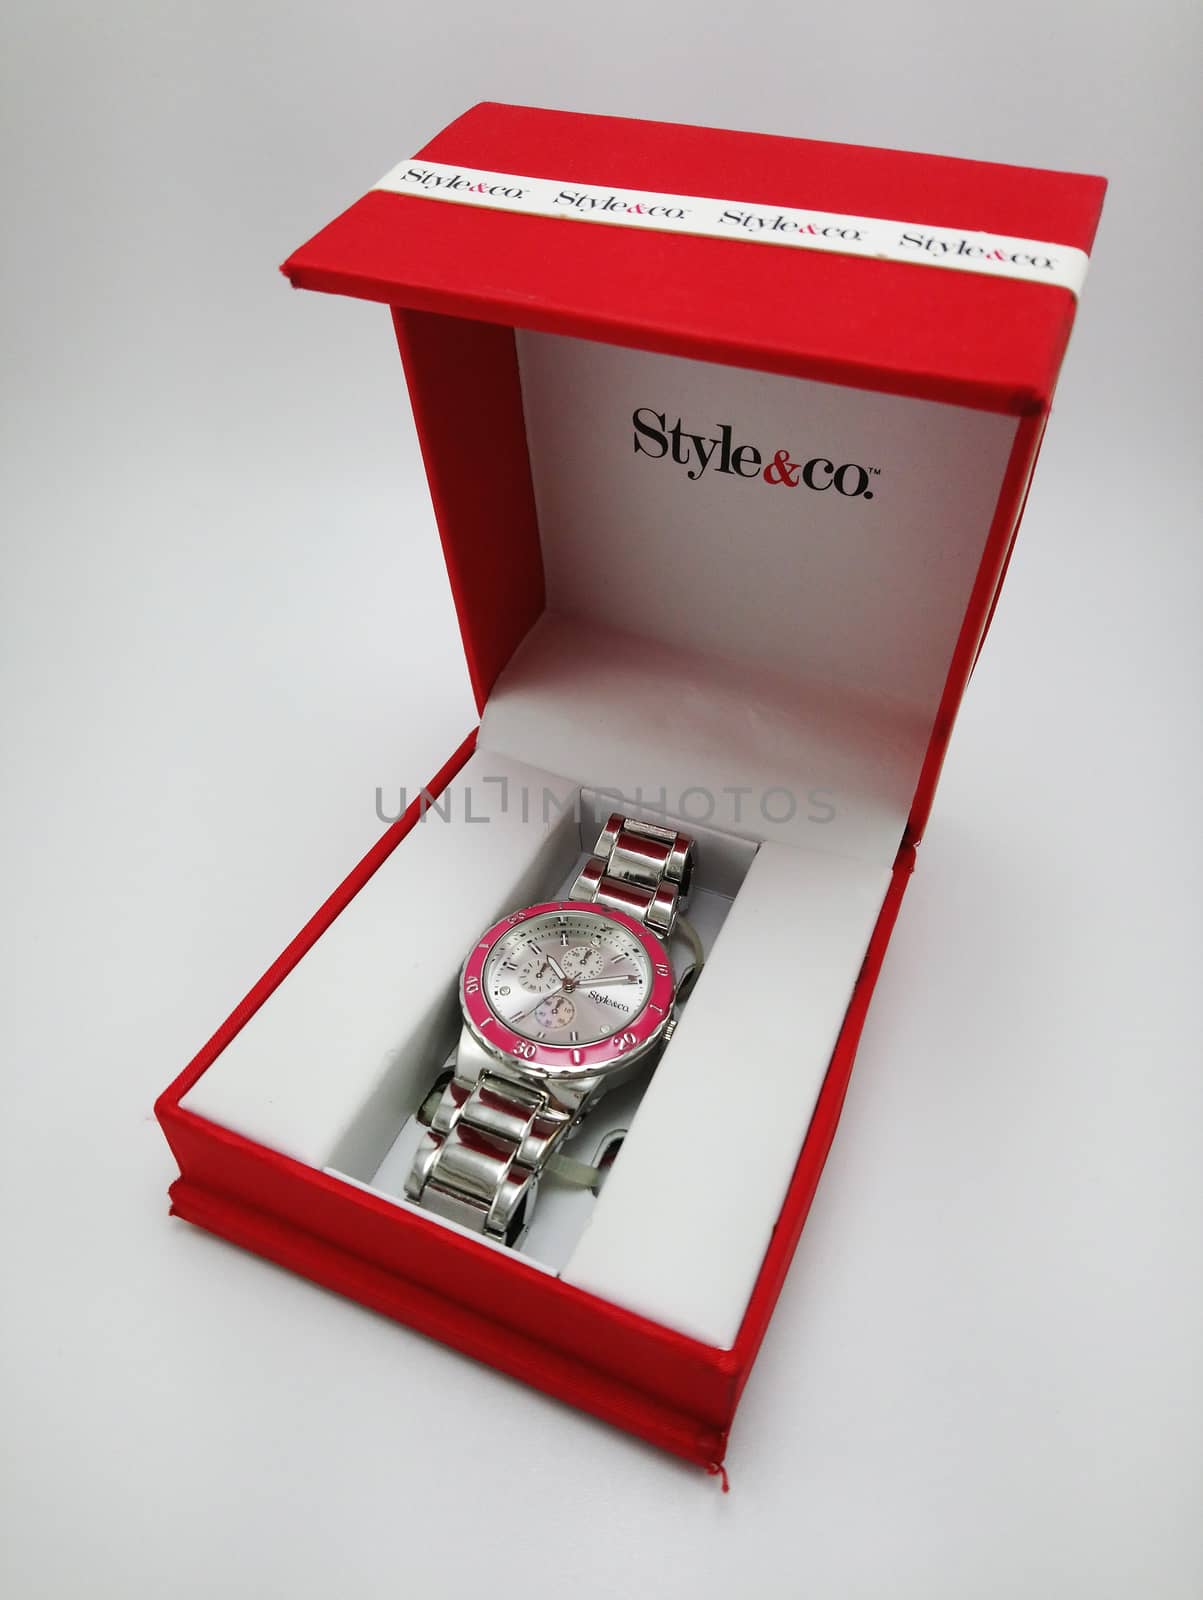 Style and co mens stainless wrist watch at red box in Manila, Ph by imwaltersy